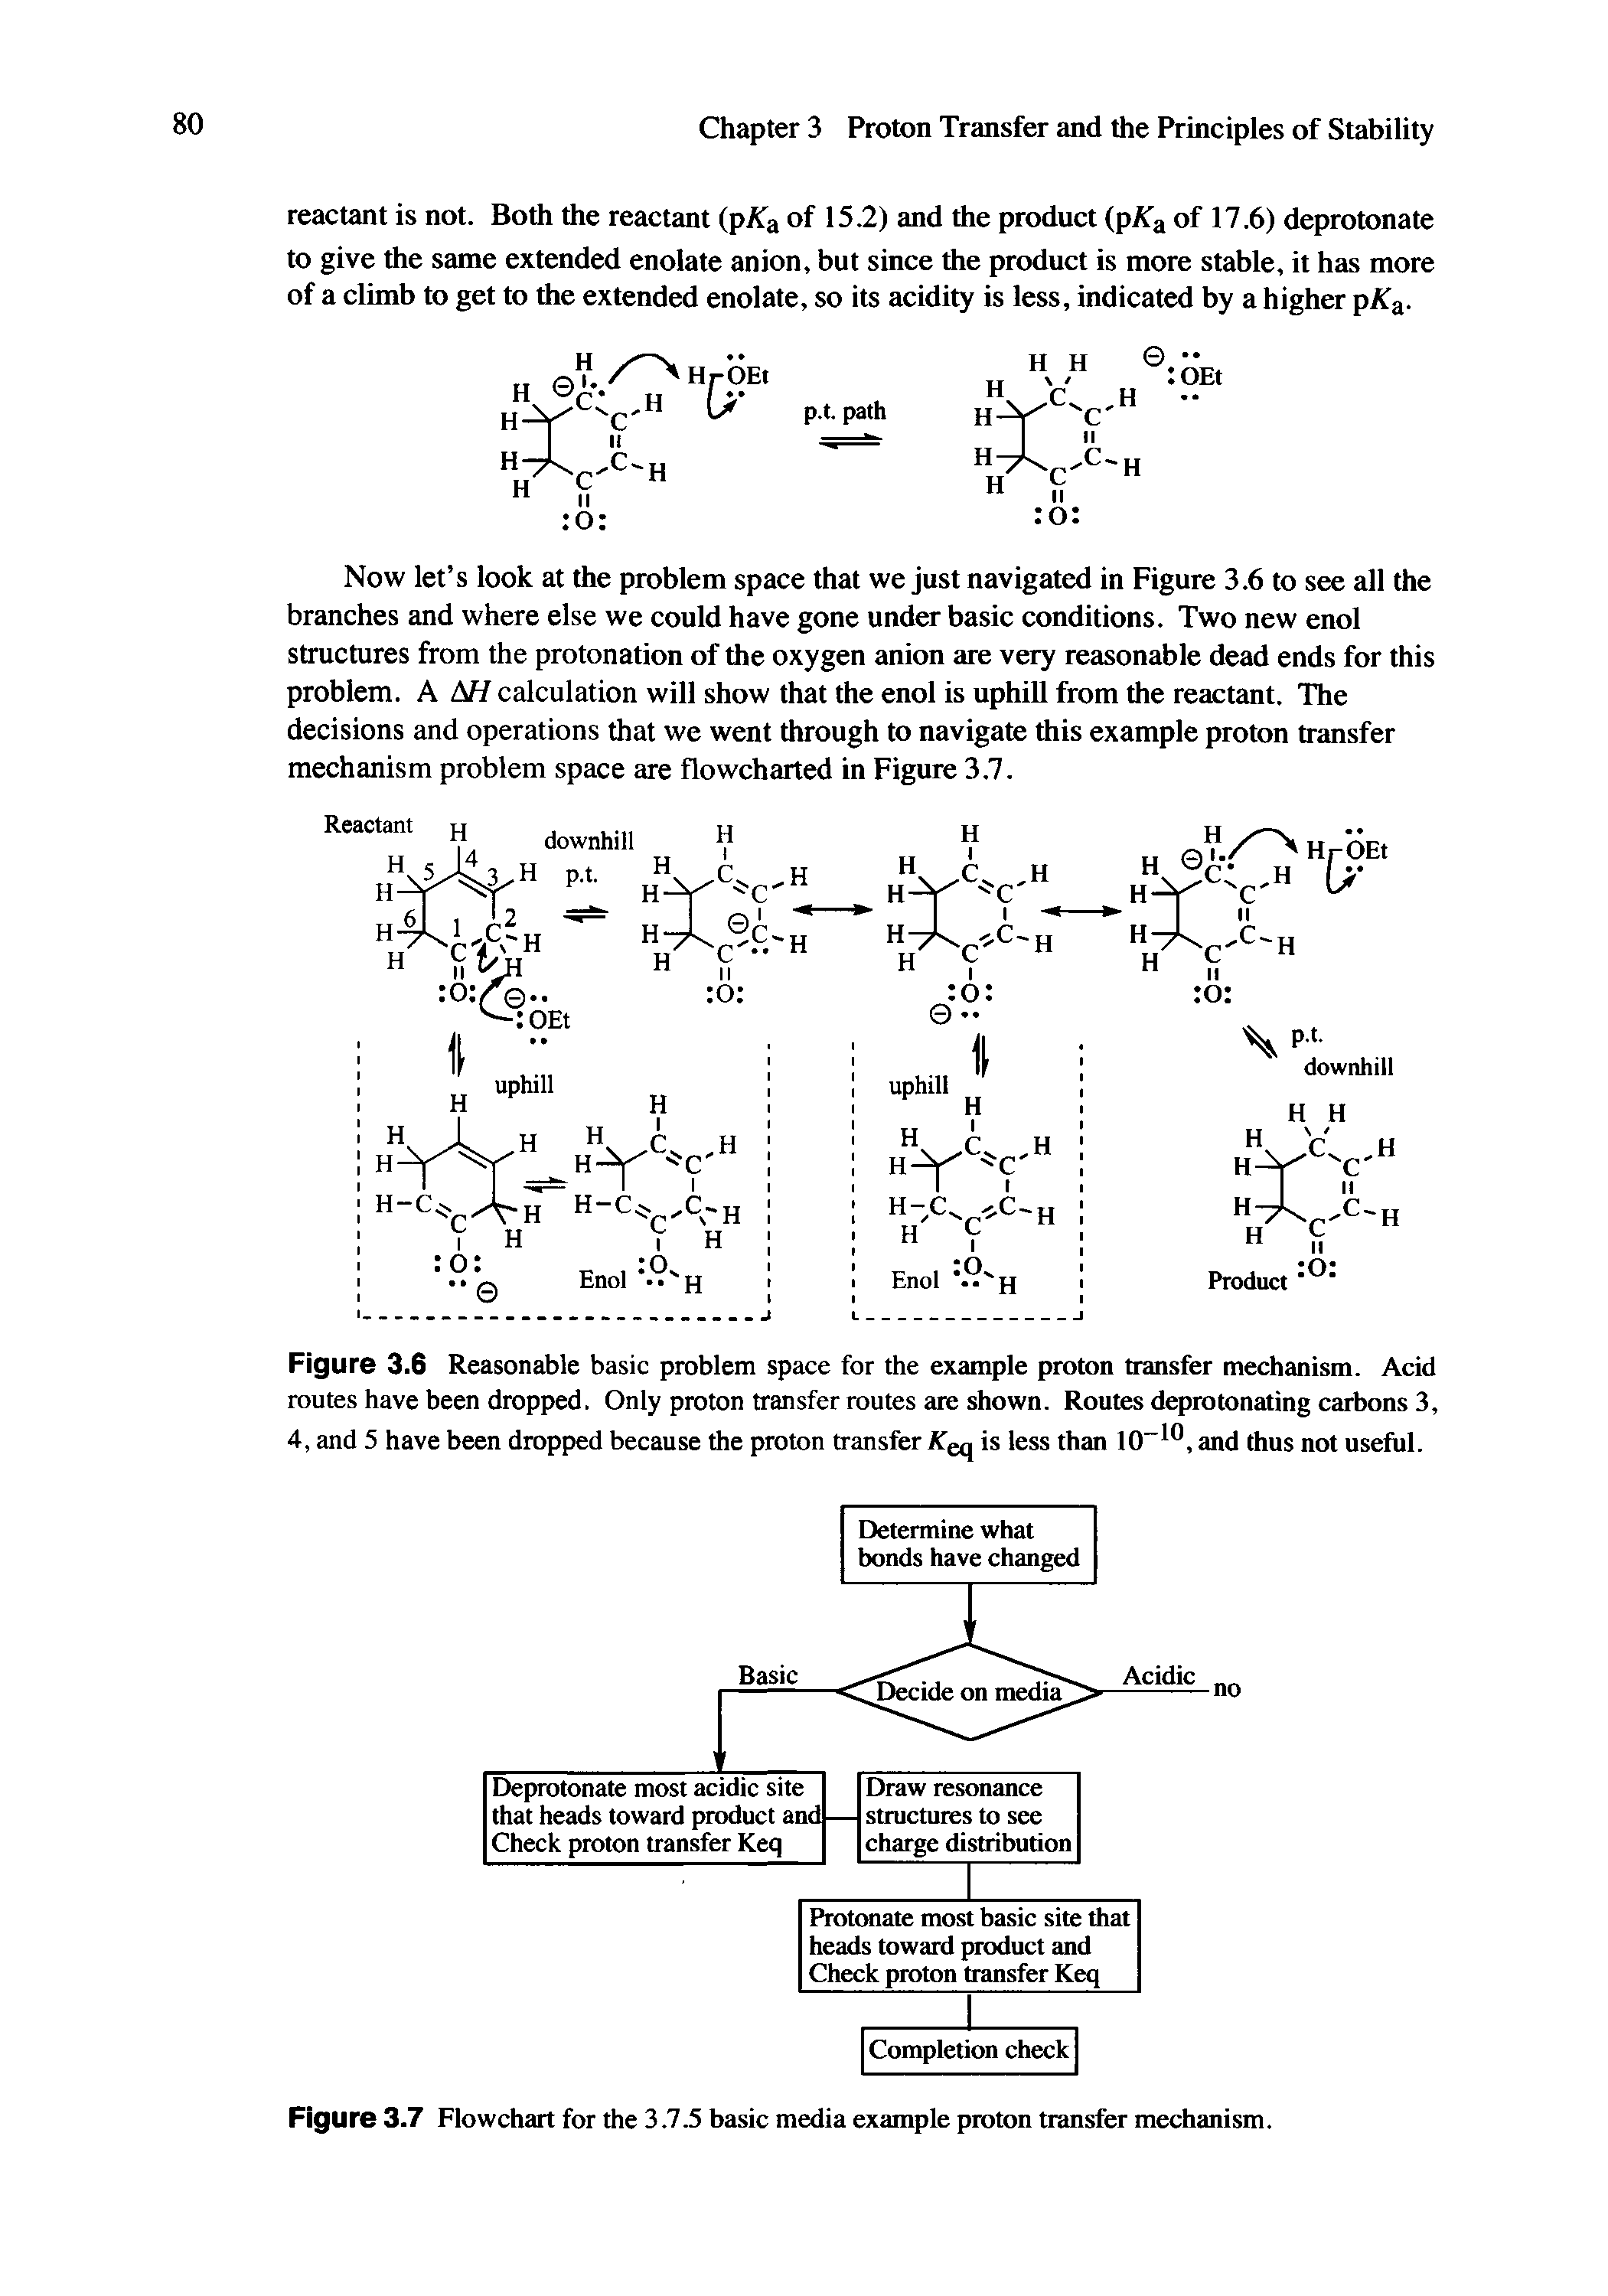 Figure 3.6 Reasonable basic problem space for the example proton transfer mechanism. Acid routes have been dropped. Only proton transfer routes tire shown. Routes deprotonating carbons 3, 4, and 5 have been dropped because the proton transfer ATeq is less than 10 , and thus not useful.